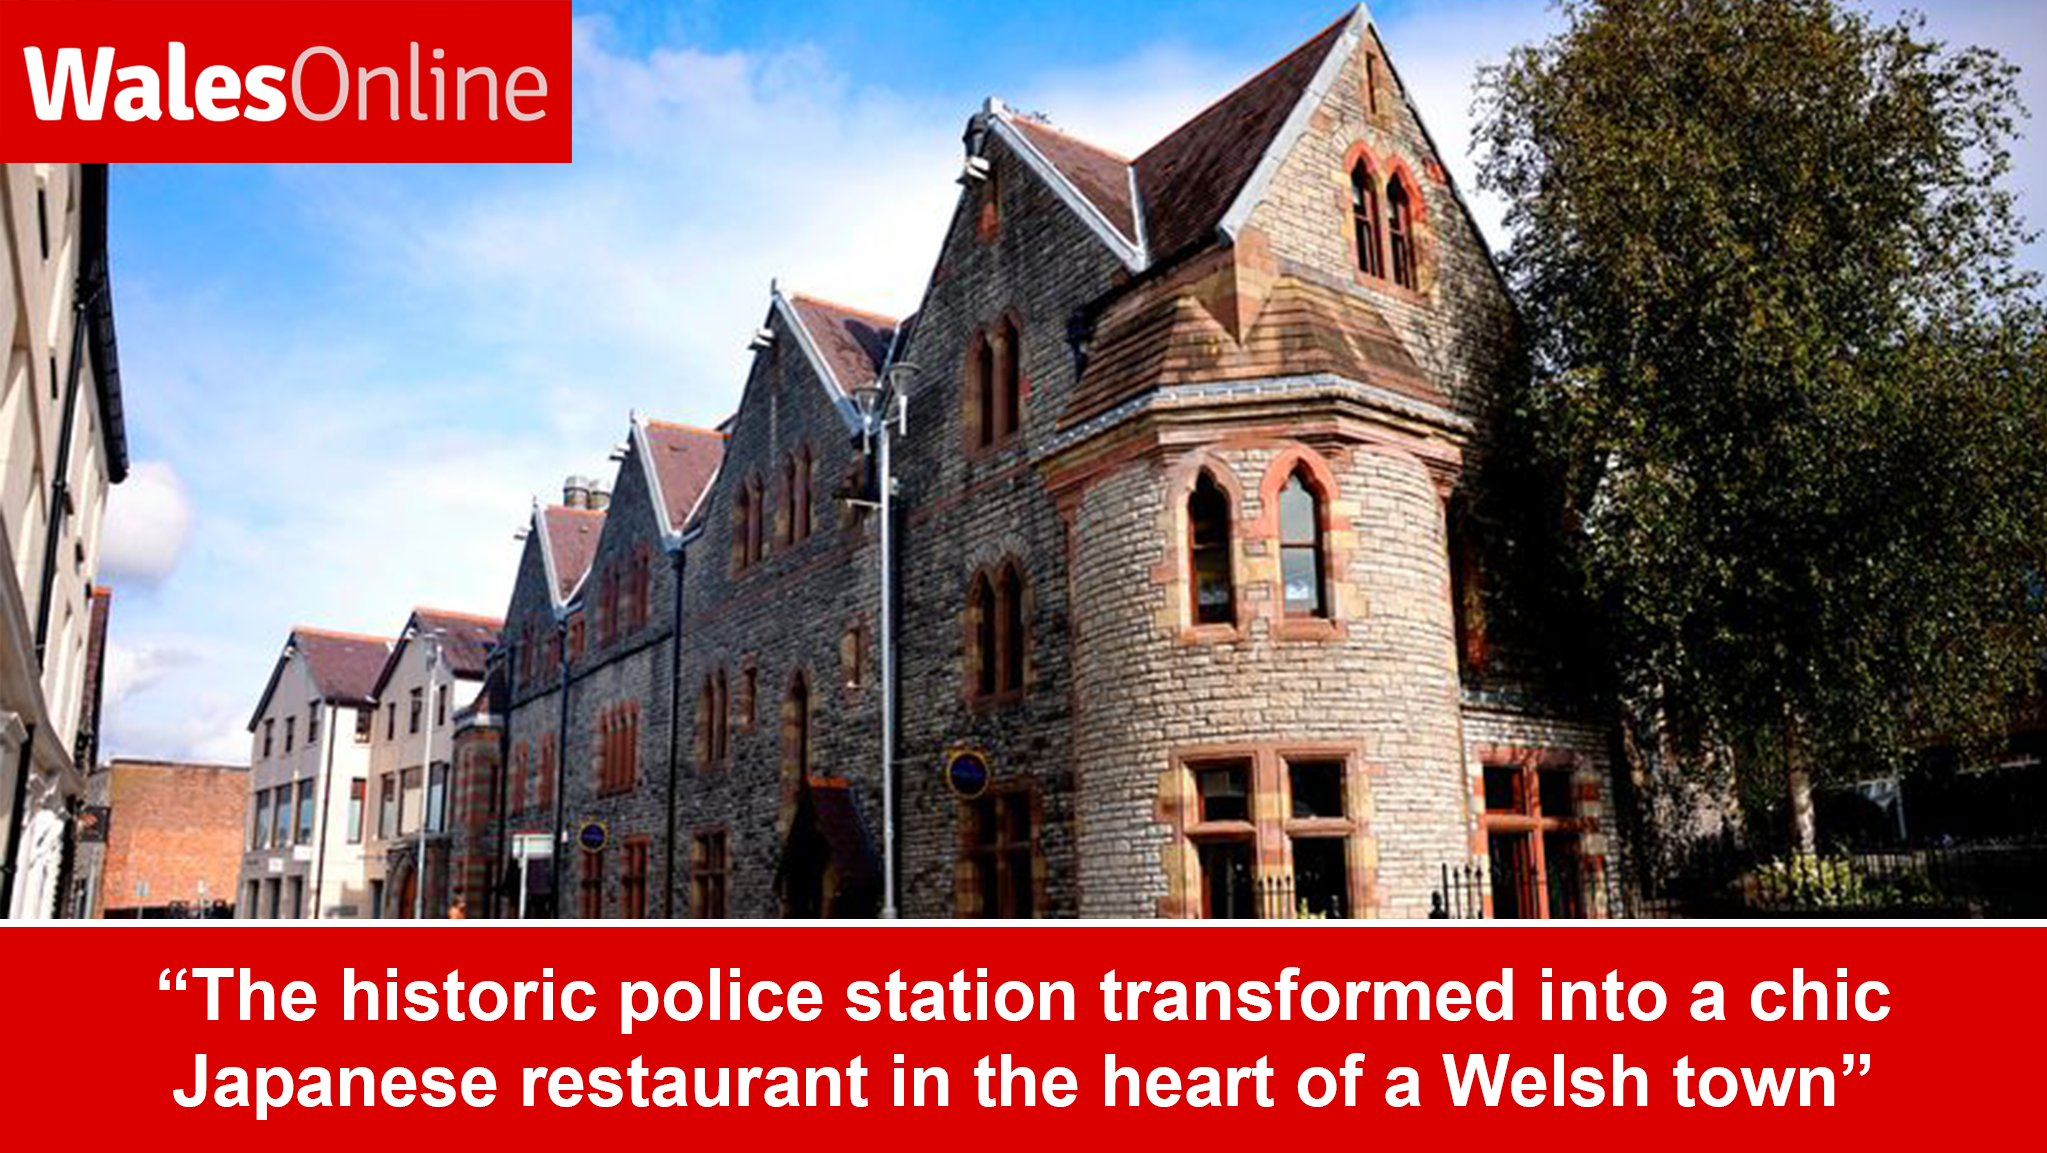 We are delighted to be featured in Wales Online!